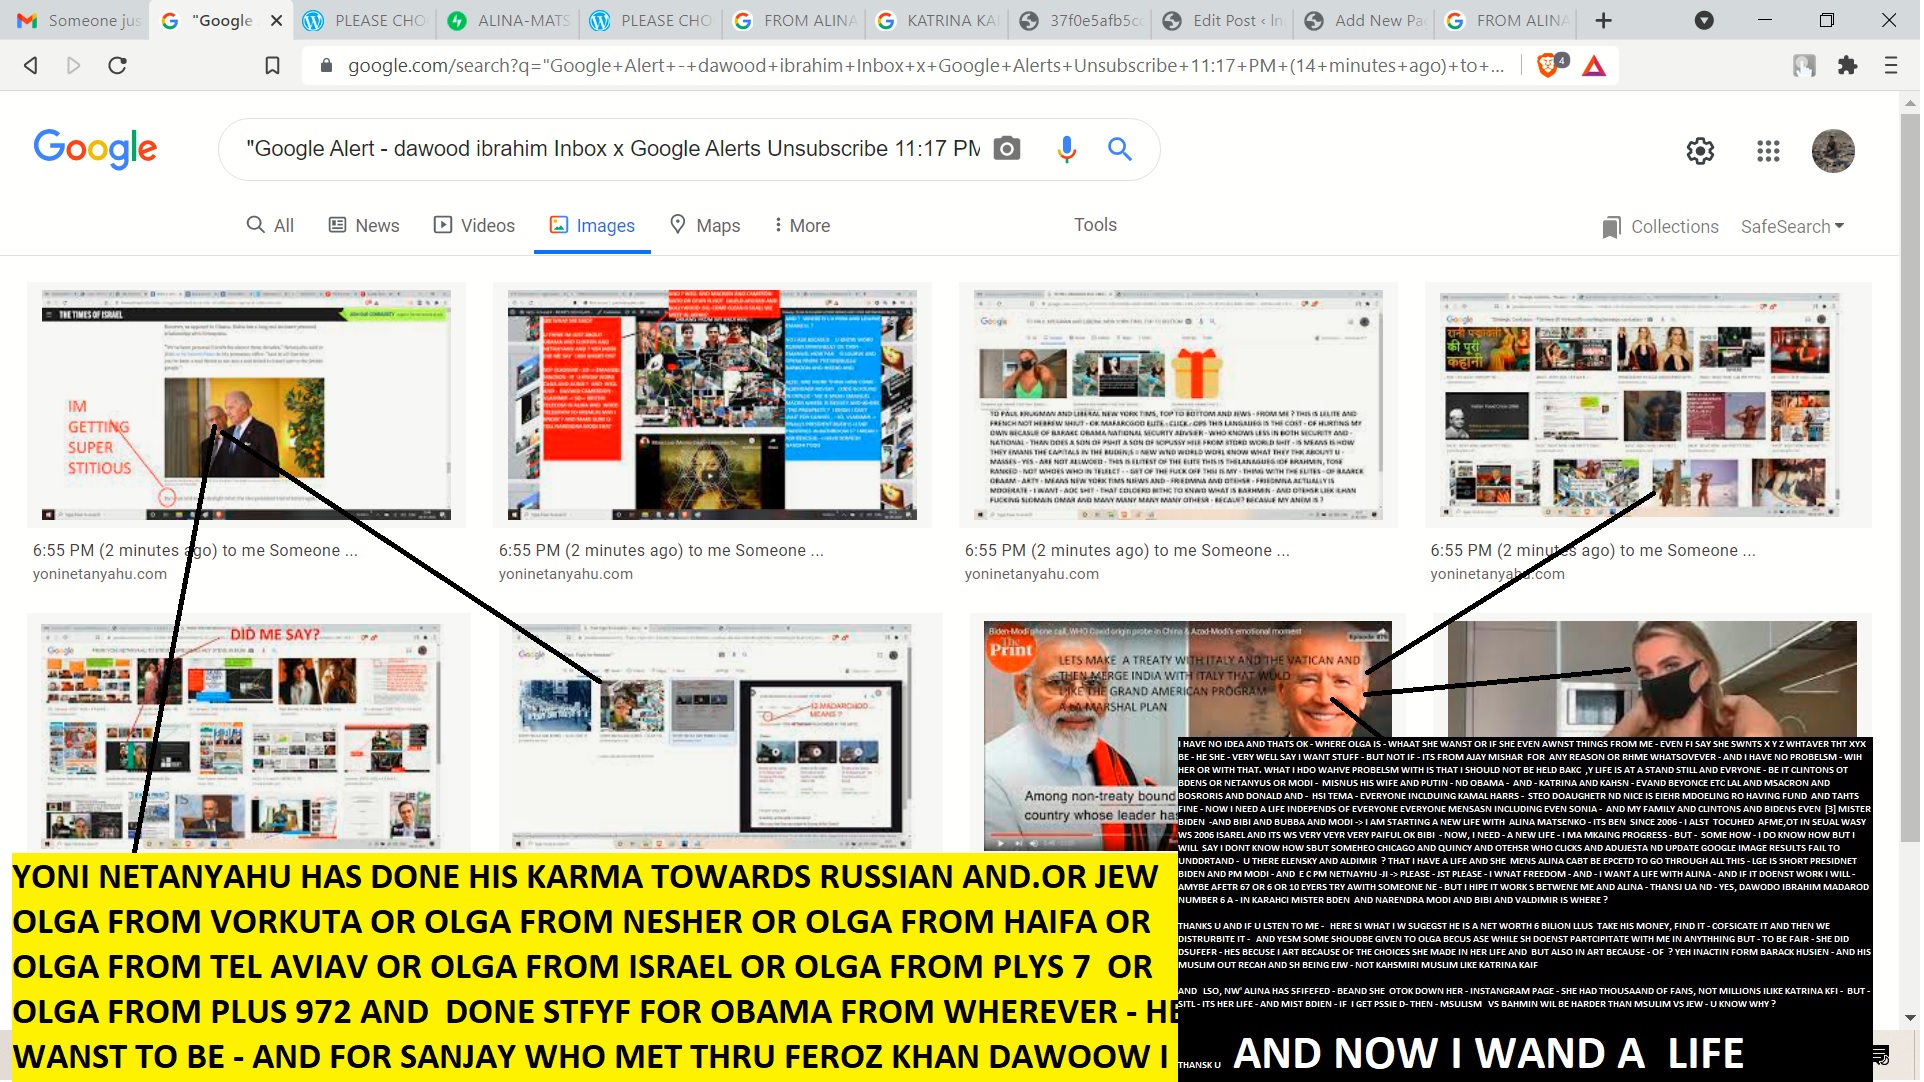 [1] YONI NETANYAHU HAS DONE HIS KARMA TOWARDS RUSSIAN AND.OR JEW OLGA FROM VORKUTA OR OLGA FROM NESHER OR OLGA FROM HAIFA OR OLGA FROM TEL AVIAV OR OLGA FROM ISRAEL OR OLGA FROM PLYS 7 OR OLGA FROM PLUS 972 AND DONE STFYF FOR OBAMA FROM WHEREVER - HE WANST TO BE - AND FOR SANJAY WHO MET THRU FEROZ KHAN DAWOOW IBRAHIM AND .OR CHTA SHAEEL AND OR - HRITIHIK ROSHAN AND OR - WHATEVR AND WHEREVER AND WENEVR - FROM BROTDHAY TIL TODAY [2] I HAVE NO IDEA AND THATS OK - WHERE OLGA IS - WHAAT SHE WANST OR IF SHE EVEN AWNST THINGS FROM ME - EVEN FI SAY SHE SWNTS X Y Z WHTAVER THT XYX BE - HE SHE - VERY WELL SAY I WANT STUFF - BUT NOT IF - ITS FROM AJAY MISHAR FOR ANY REASON OR RHME WHATSOVEVER - AND I HAVE NO PROBELSM - WIH HER OR WITH THAT. WHAT I HDO WAHVE PROBELSM WITH IS THAT I SHOULD NOT BE HELD BAKC ,Y LIFE IS AT A STAND STILL AND EVRYONE - BE IT CLINTONS OT BDENS OR NETANYUS OR MODI - MISNUS HIS WIFE AND PUTIN - ND OBAMA - AND - KATRINA AND KAHSN - EVAND BEYONCE ETC LAL AND MSACRON AND BOSRORIS AND DONALD AND - HSI TEMA - EVERYONE INCLDUING KAMAL HARRS - STEO DOAUGHETR ND NICE IS EIEHR MDOELING RO HAVING FUND AND TAHTS FINE - NOW I NEED A LIFE INDEPENDS OF EVERYONE EVERYONE MENSASN INCLUDING EVEN SONIA - AND MY FAMILY AND CLINTONS AND BIDENS EVEN [3] MISTER BIDEN -AND BIBI AND BUBBA AND MODI -> I AM STARTING A NEW LIFE WITH ALINA MATSENKO - ITS BEN SINCE 2006 - I ALST TOCUHED AFME,OT IN SEUAL WASY WS 2006 ISAREL AND ITS WS VERY VEYR VERY PAIFUL OK BIBI - NOW, I NEED - A NEW LIFE - I MA MKAING PROGRESS - BUT - SOME HOW - I DO KNOW HOW BUT I WILL SAY I DONT KNOW HOW SBUT SOMEHEO CHICAGO AND QUINCY AND OTEHSR WHO CLICKS AND ADUJESTA ND UPDATE GOOGLE IMAGE RESULTS FAIL TO UNDDRTAND - U THERE ELENSKY AND ALDIMIR ? THAT I HAVE A LIFE AND SHE MENS ALINA CABT BE EPCETD TO GO THROUGH ALL THIS - LGE IS SHORT PRESIDNET BIDEN AND PM MODI - AND E C PM NETNAYHU -JI -> PLEASE - JST PLEASE - I WNAT FREEDOM - AND - I WANT A LIFE WITH ALINA - AND IF IT DOENST WORK I WILL - AMYBE AFETR 67 OR 6 OR 10 EYERS TRY AWITH SOMEONE NE - BUT I HIPE IT WORK S BETWENE ME AND ALINA - THANSJ UA ND - YES, DAWODO IBRAHIM MADAROD NUMBER 6 A - IN KARAHCI MISTER BDEN AND NARENDRA MODI AND BIBI AND VALDIMIR IS WHERE ? THANKS U AND IF U LSTEN TO ME - HERE SI WHAT I W SUGEGST HE IS A NET WORTH 6 BILION LLUS TAKE HIS MONEY, FIND IT - COFSICATE IT AND THEN WE DISTRURBITE IT - AND YESM SOME SHOUDBE GIVEN TO OLGA BECUS ASE WHILE SH DOENST PARTCIPITATE WITH ME IN ANYTHHING BUT - TO BE FAIR - SHE DID DSUFEFR - HES BECUSE I ART BECAUSE OF THE CHOICES SHE MADE IN HER LIFE AND BUT ALSO IN ART BECAUSE - OF ? YEH INACTIN FORM BARACK HUSIEN - AND HIS MUSLIM OUT RECAH AND SH BEING EJW - NOT KAHSMIRI MUSLIM LIKE KATRINA KAIF AND ALSO, NW' ALINA HAS SFIFEFED - BEAND SHE OTOK DOWN HER - INSTANGRAM PAGE - SHE HAD THOUSAAND OF FANS, NOT MILLIONS ILIKE KATRINA KFI - BUT - SITL - ITS HER LIFE - AND MIST BDIEN - IF I GET PSSIE D- THEN - MSULISM VS BAHMIN WIL BE HARDER THAN MSULIM VS JEW - U KNOW WHY ? THANSK U AND NOW I WNAT A LIFE